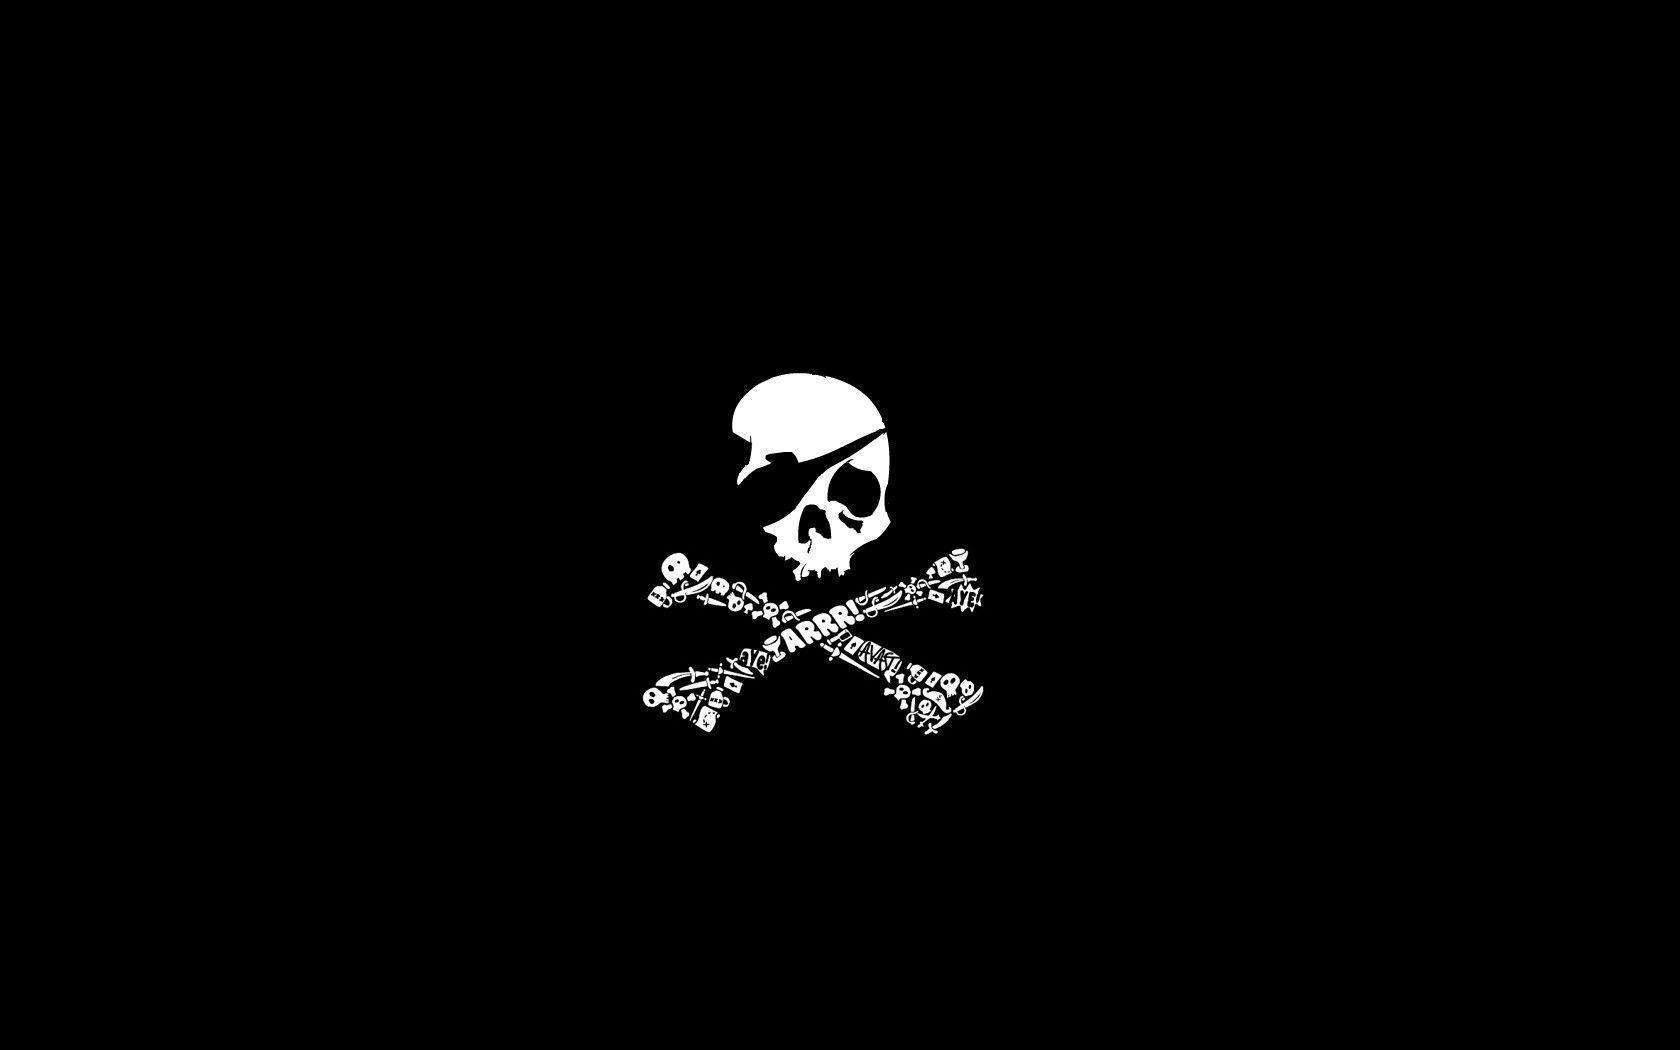 Pirate Jolly Roger wallpaper and image, picture